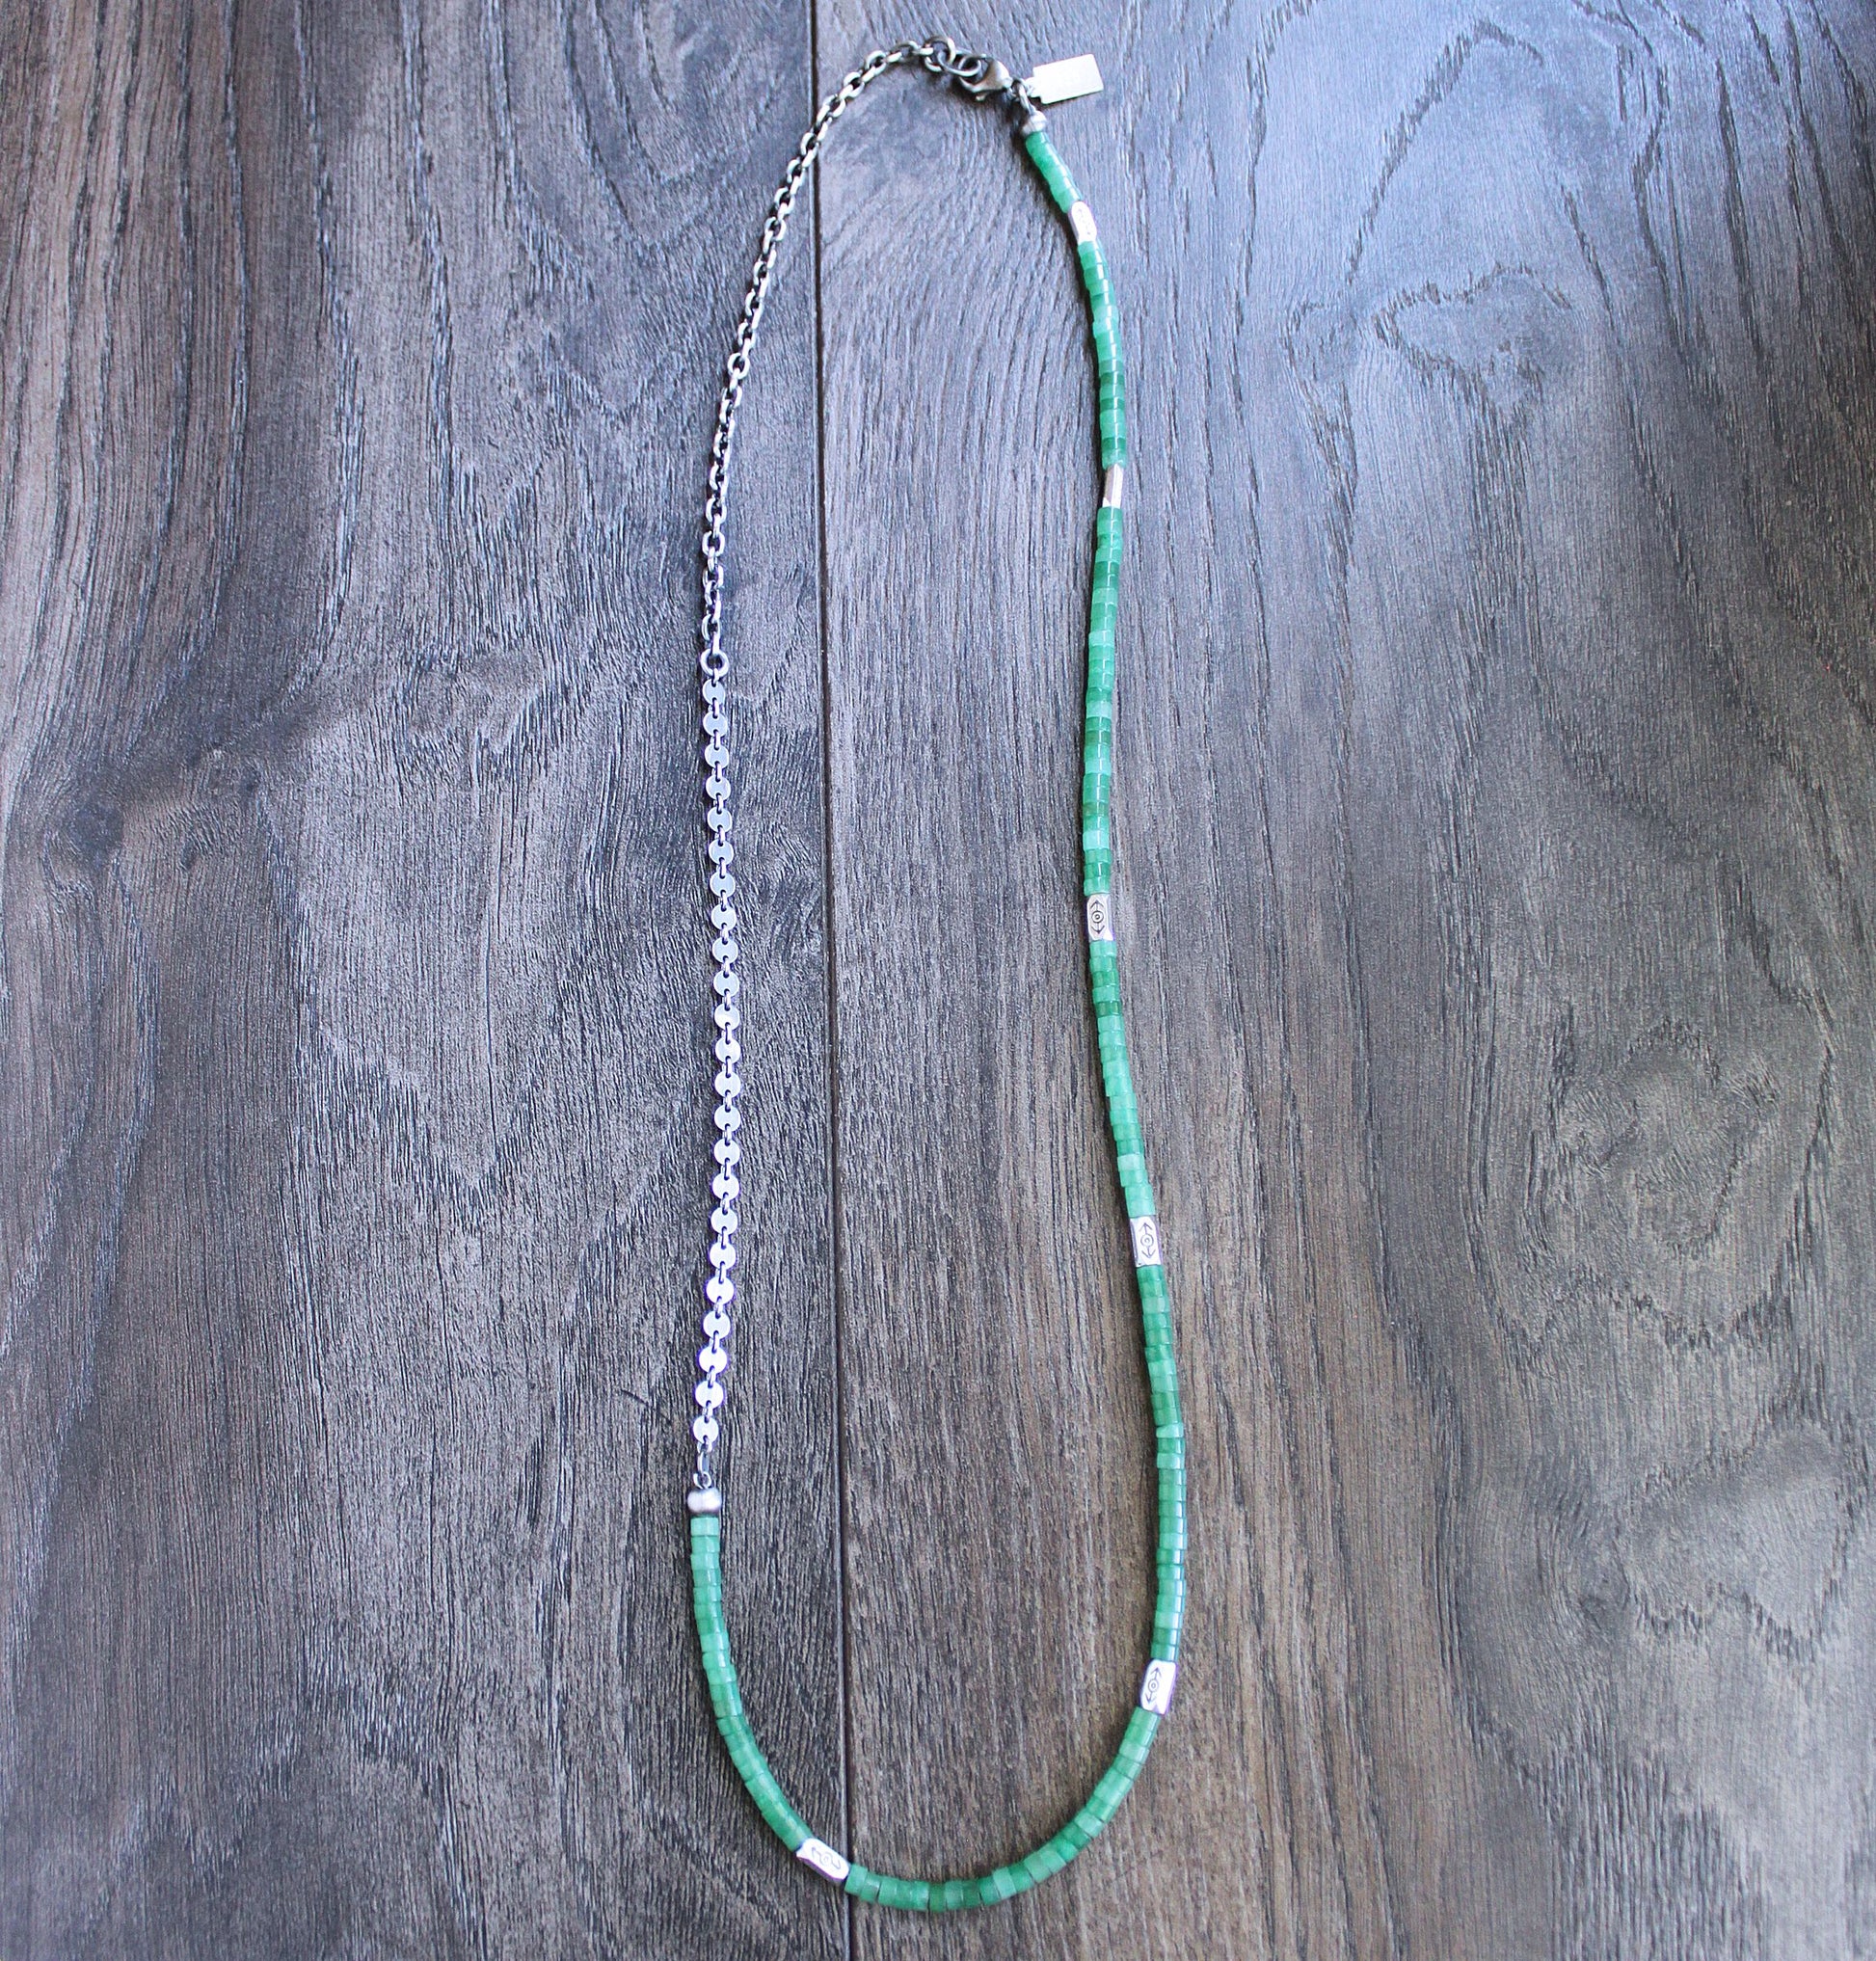 Men's Hybrid Bead and Chain Necklace